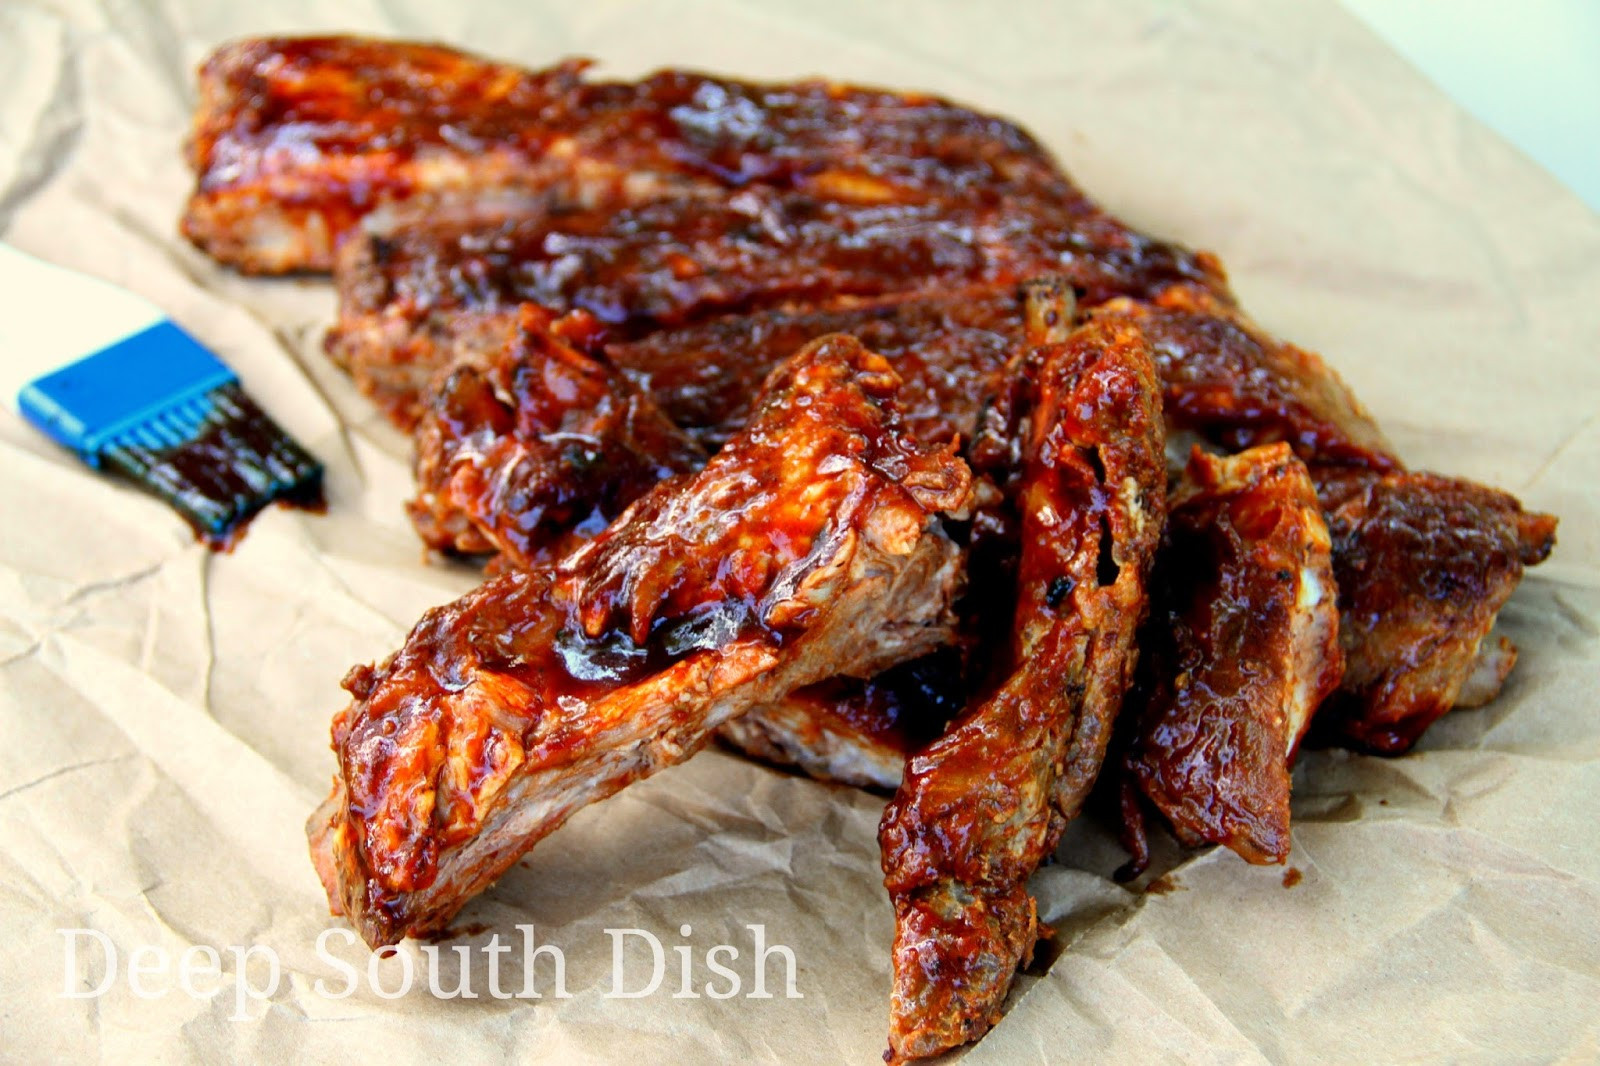 Pork Back Ribs Grill
 Deep South Dish Grilled Pork Spareribs or Baby Back Ribs